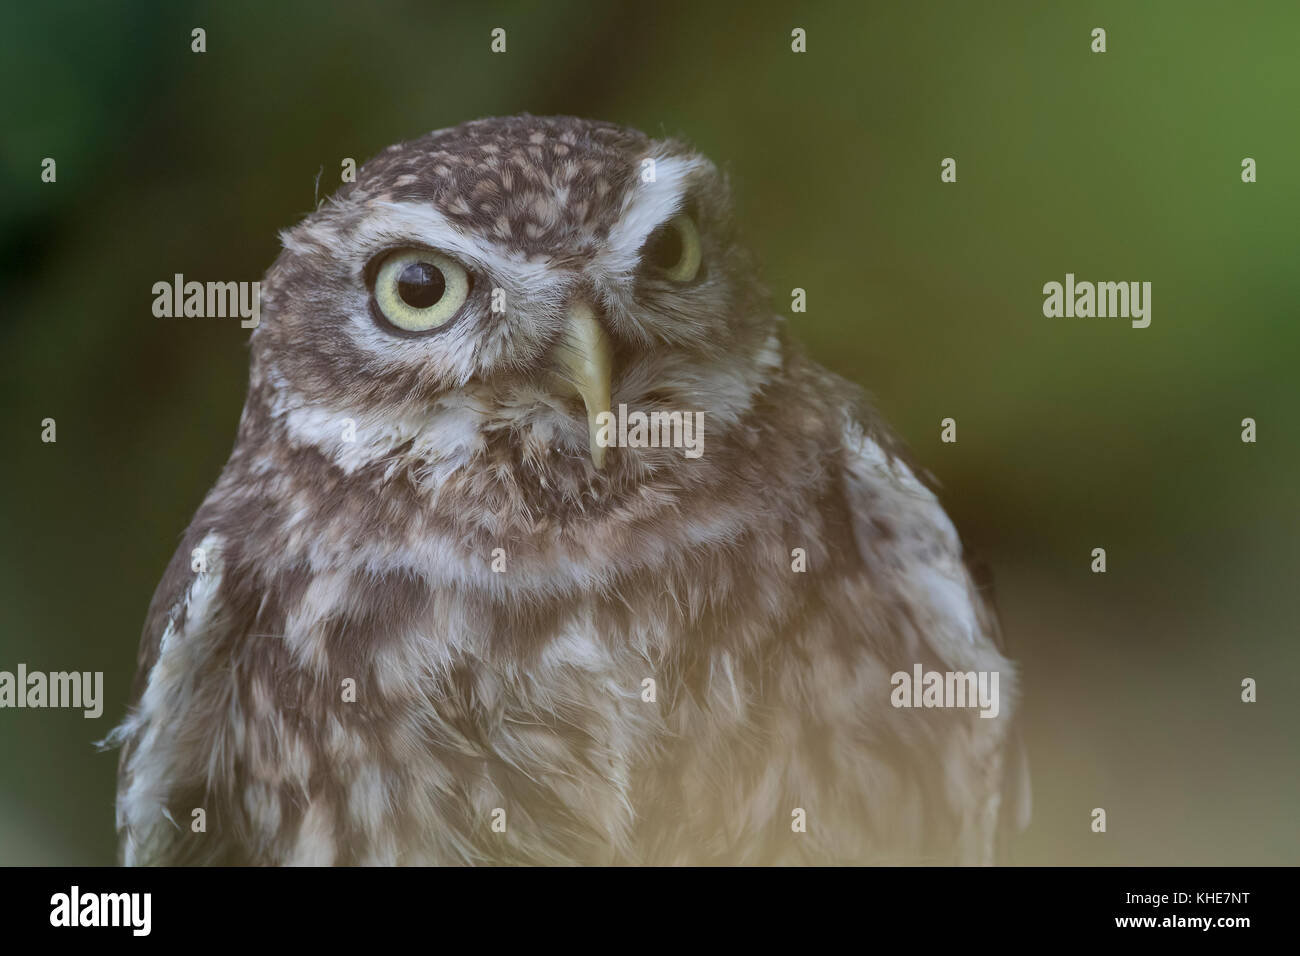 little owl, Athene noctua, close up portrait displaying expression of face and body perched near a hedgerow in Devon, England during autumn. Stock Photo